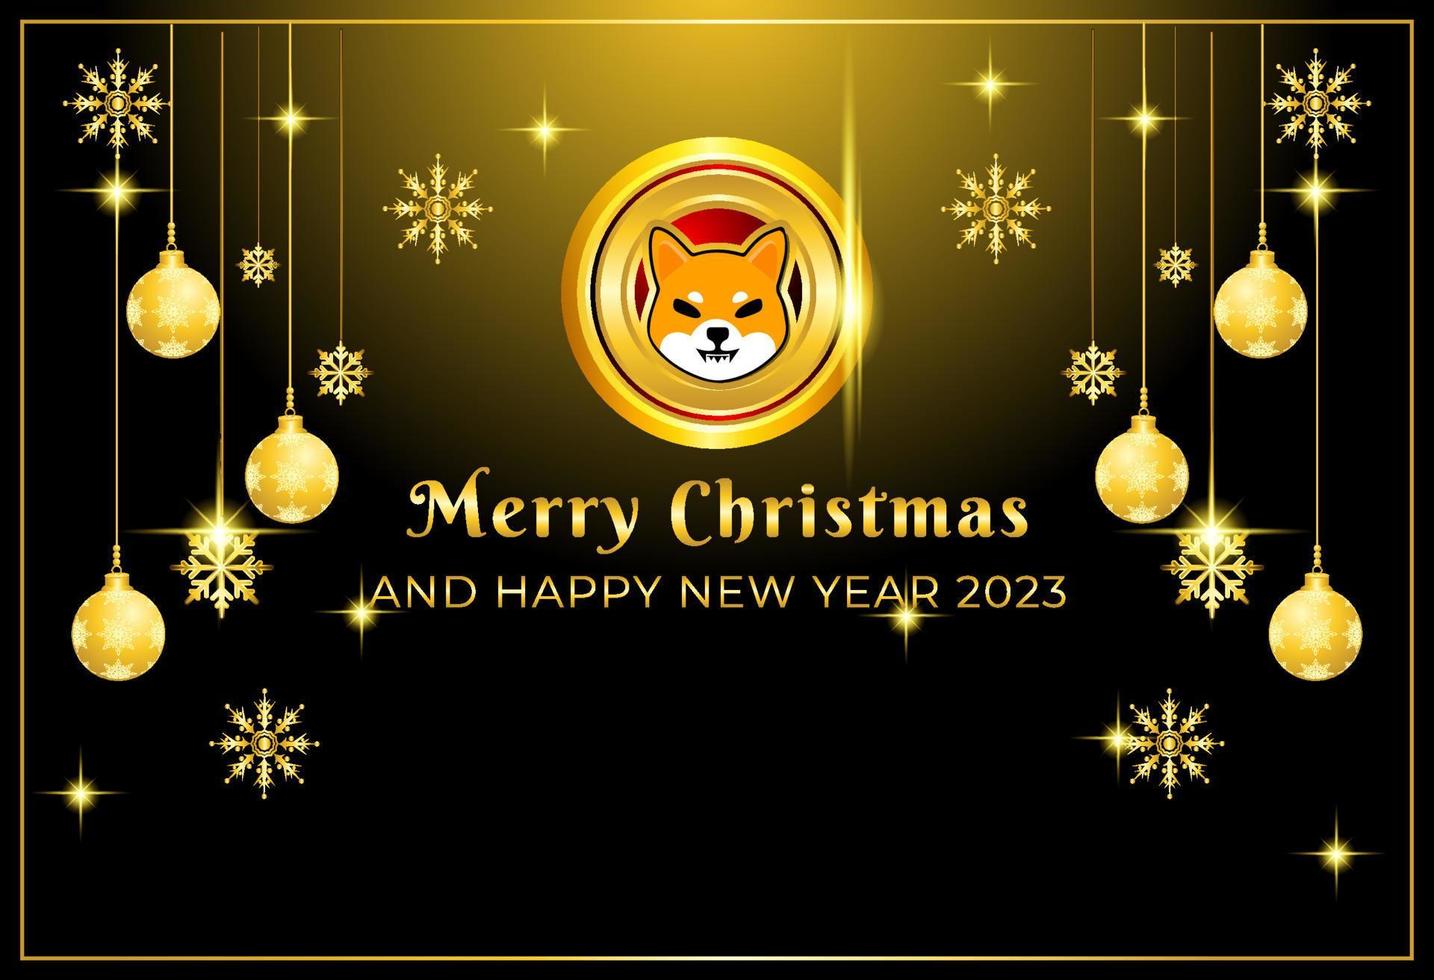 shiba inu cryptocurrency on merry christmas and happy new year 2023 background vector